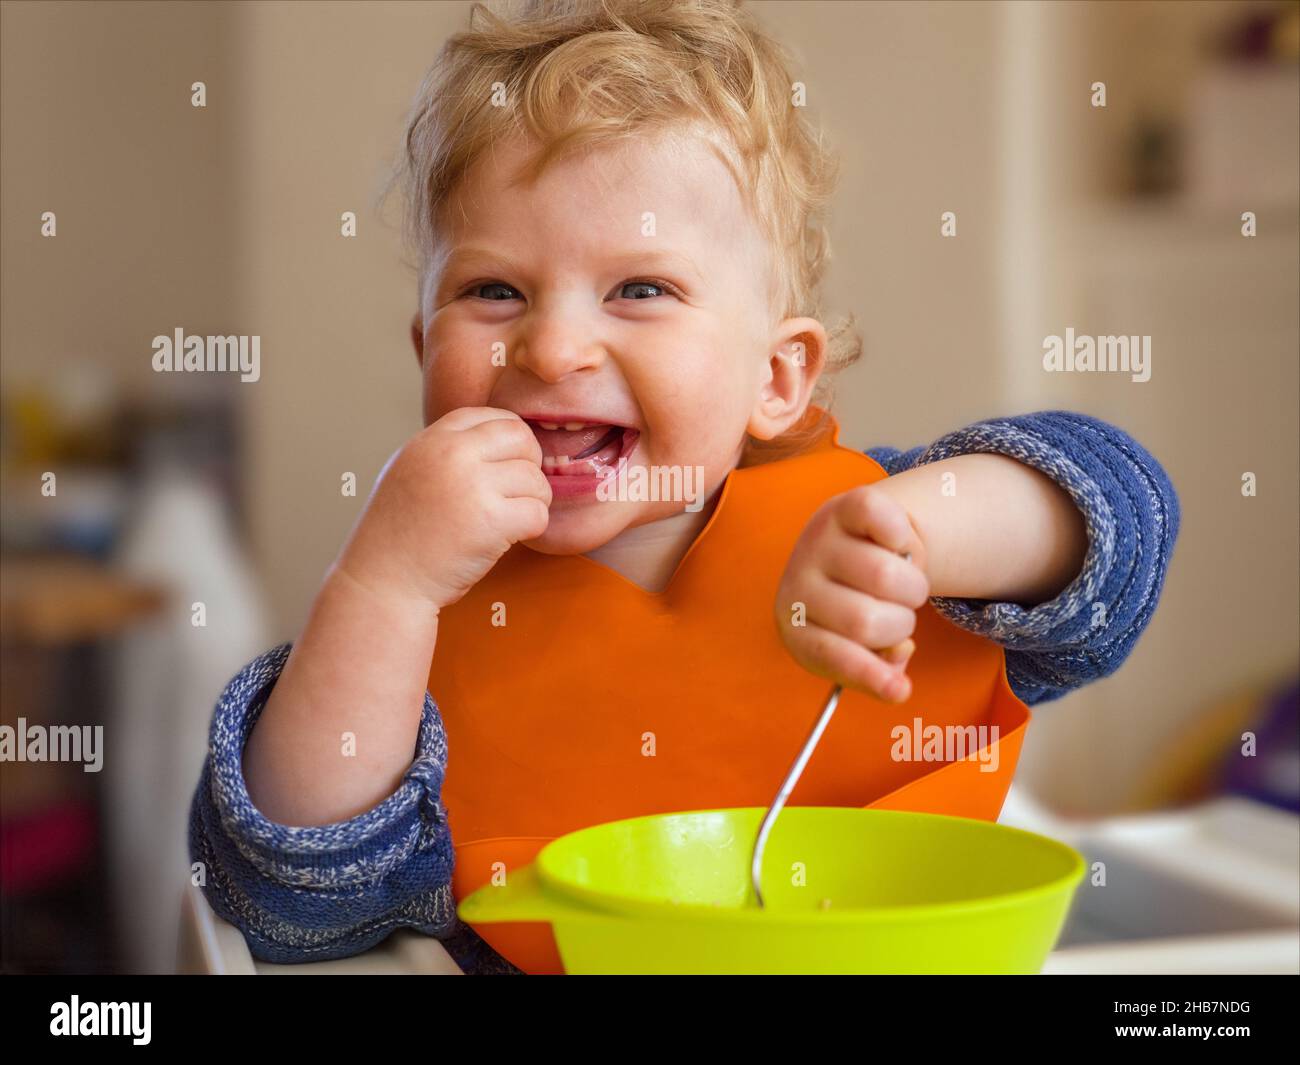 Happy one year old baby boy smiling eating with cutlery at home Stock Photo